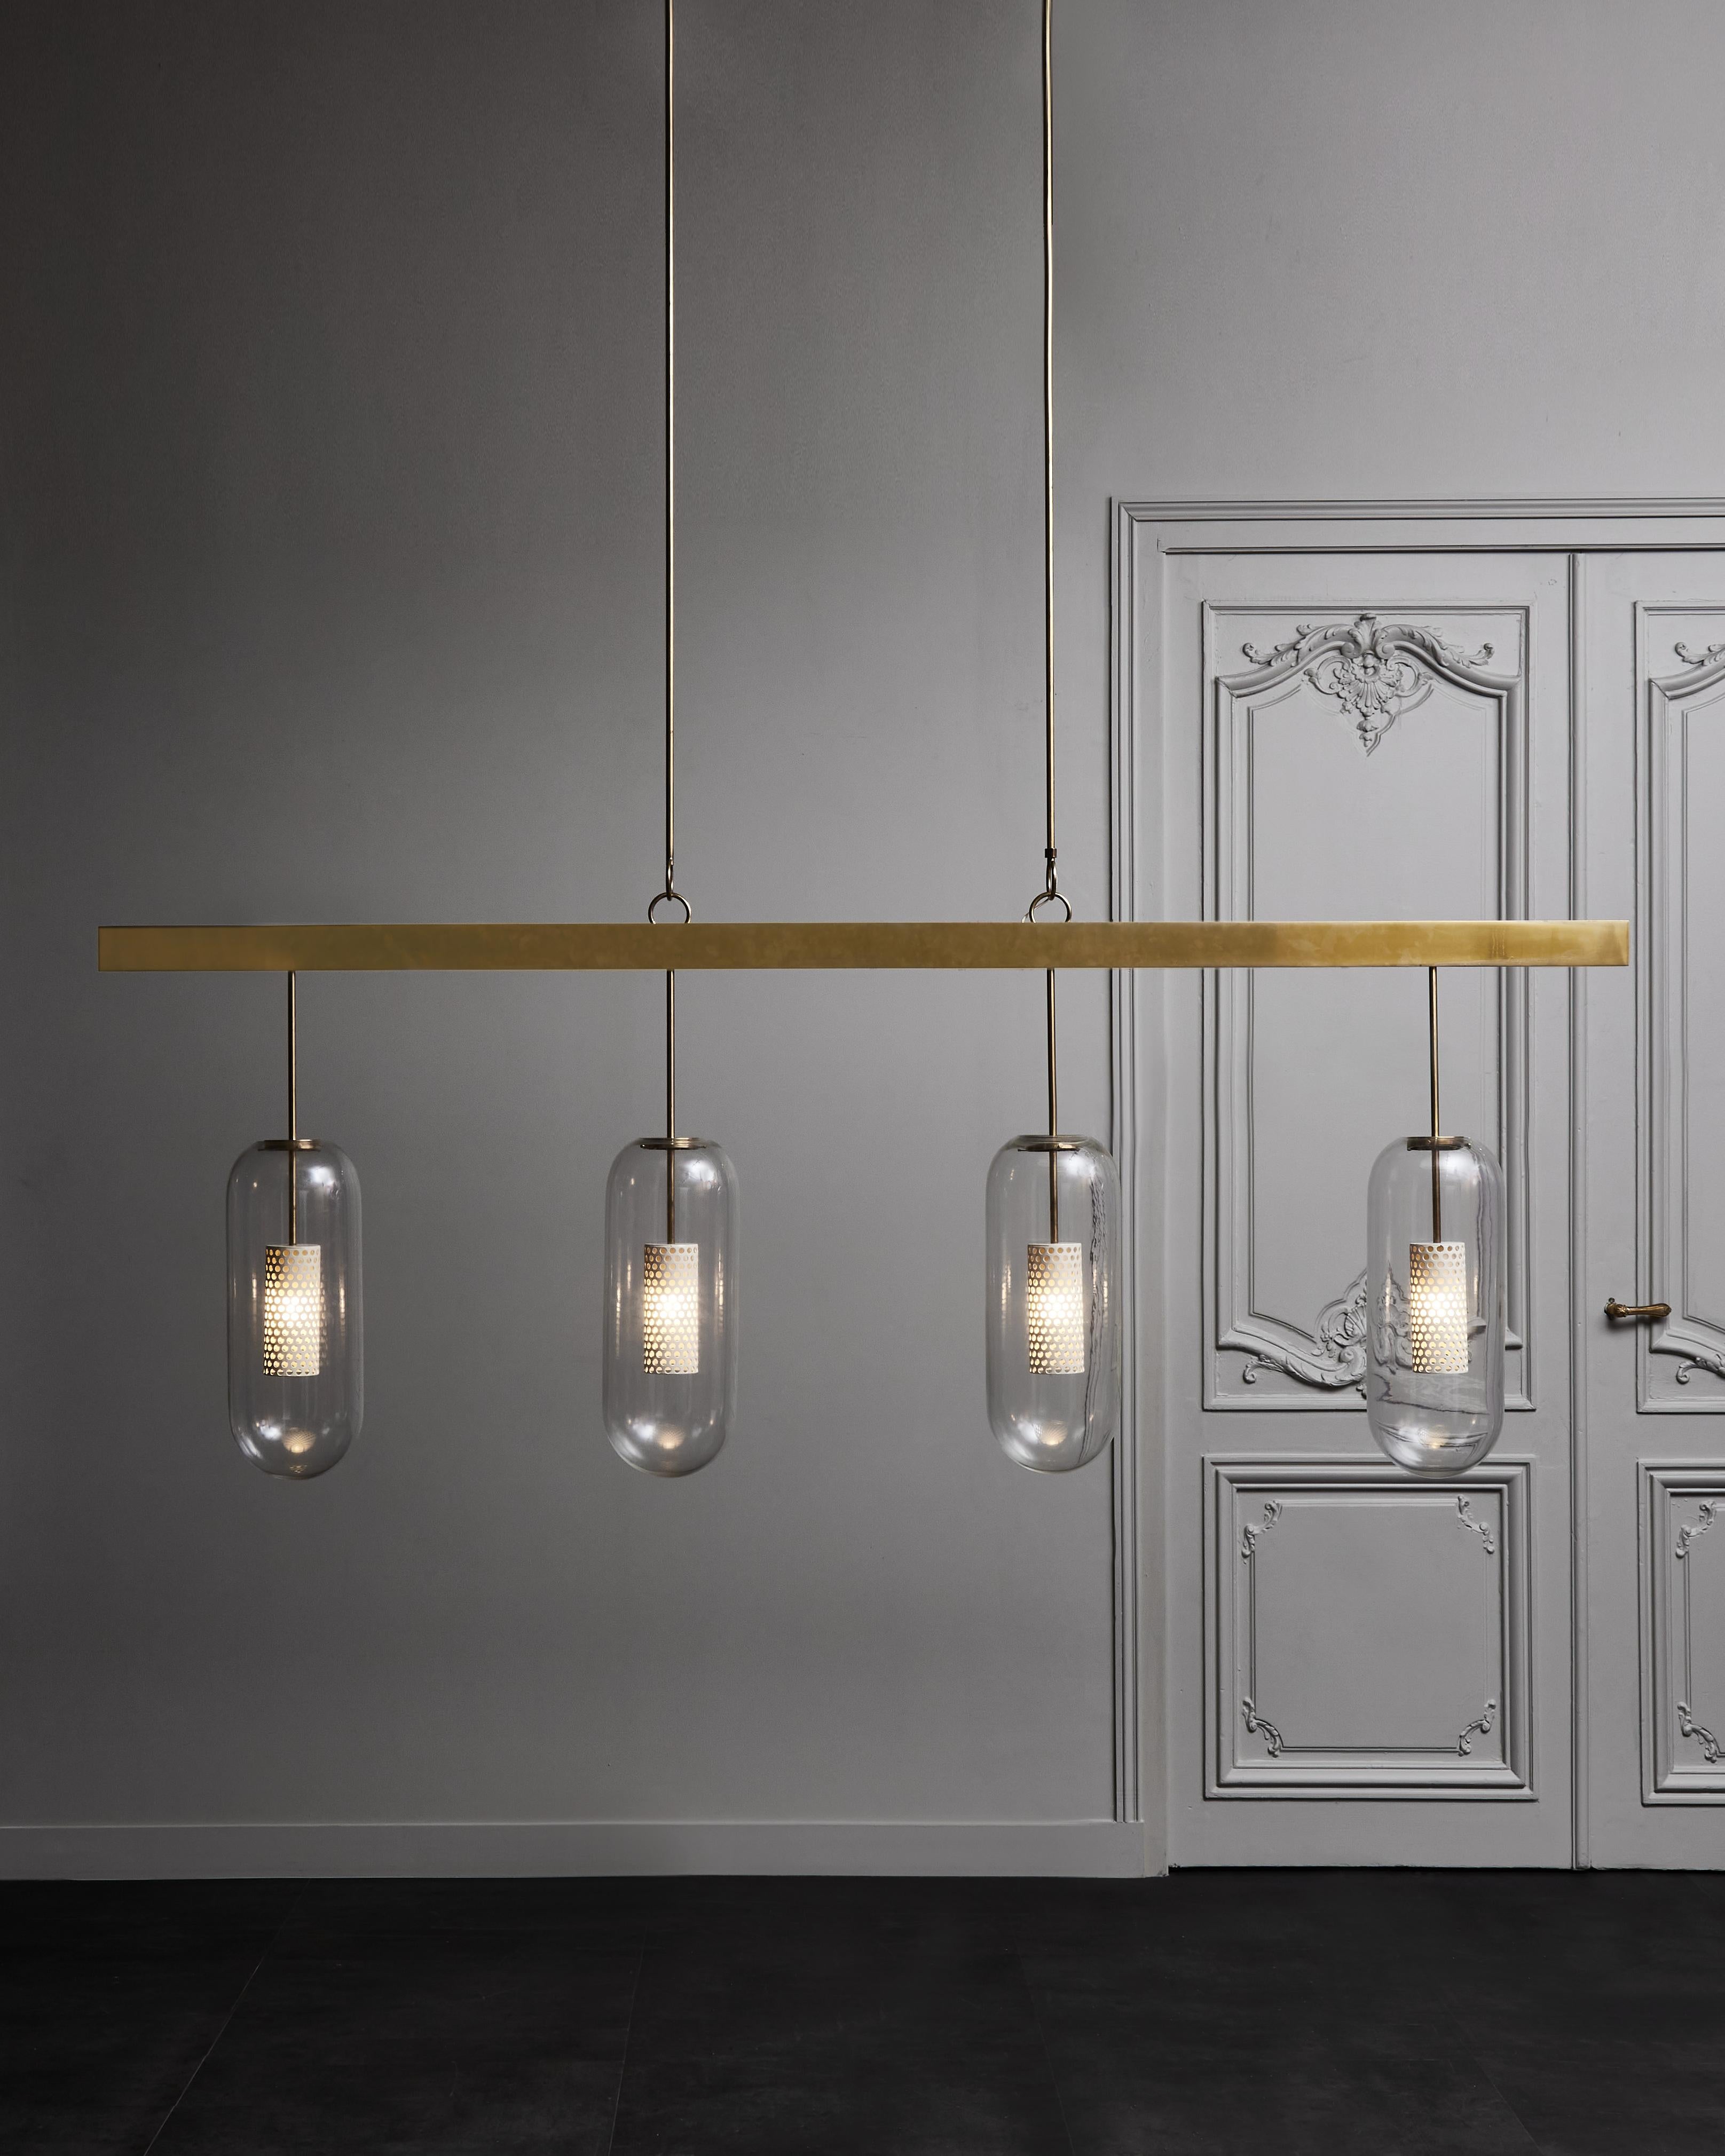 Long horizontal chandelier designed and made by Diego Mardegan.
Brass structure holding five perforated metal sconces encapsulated in glass domes.
 